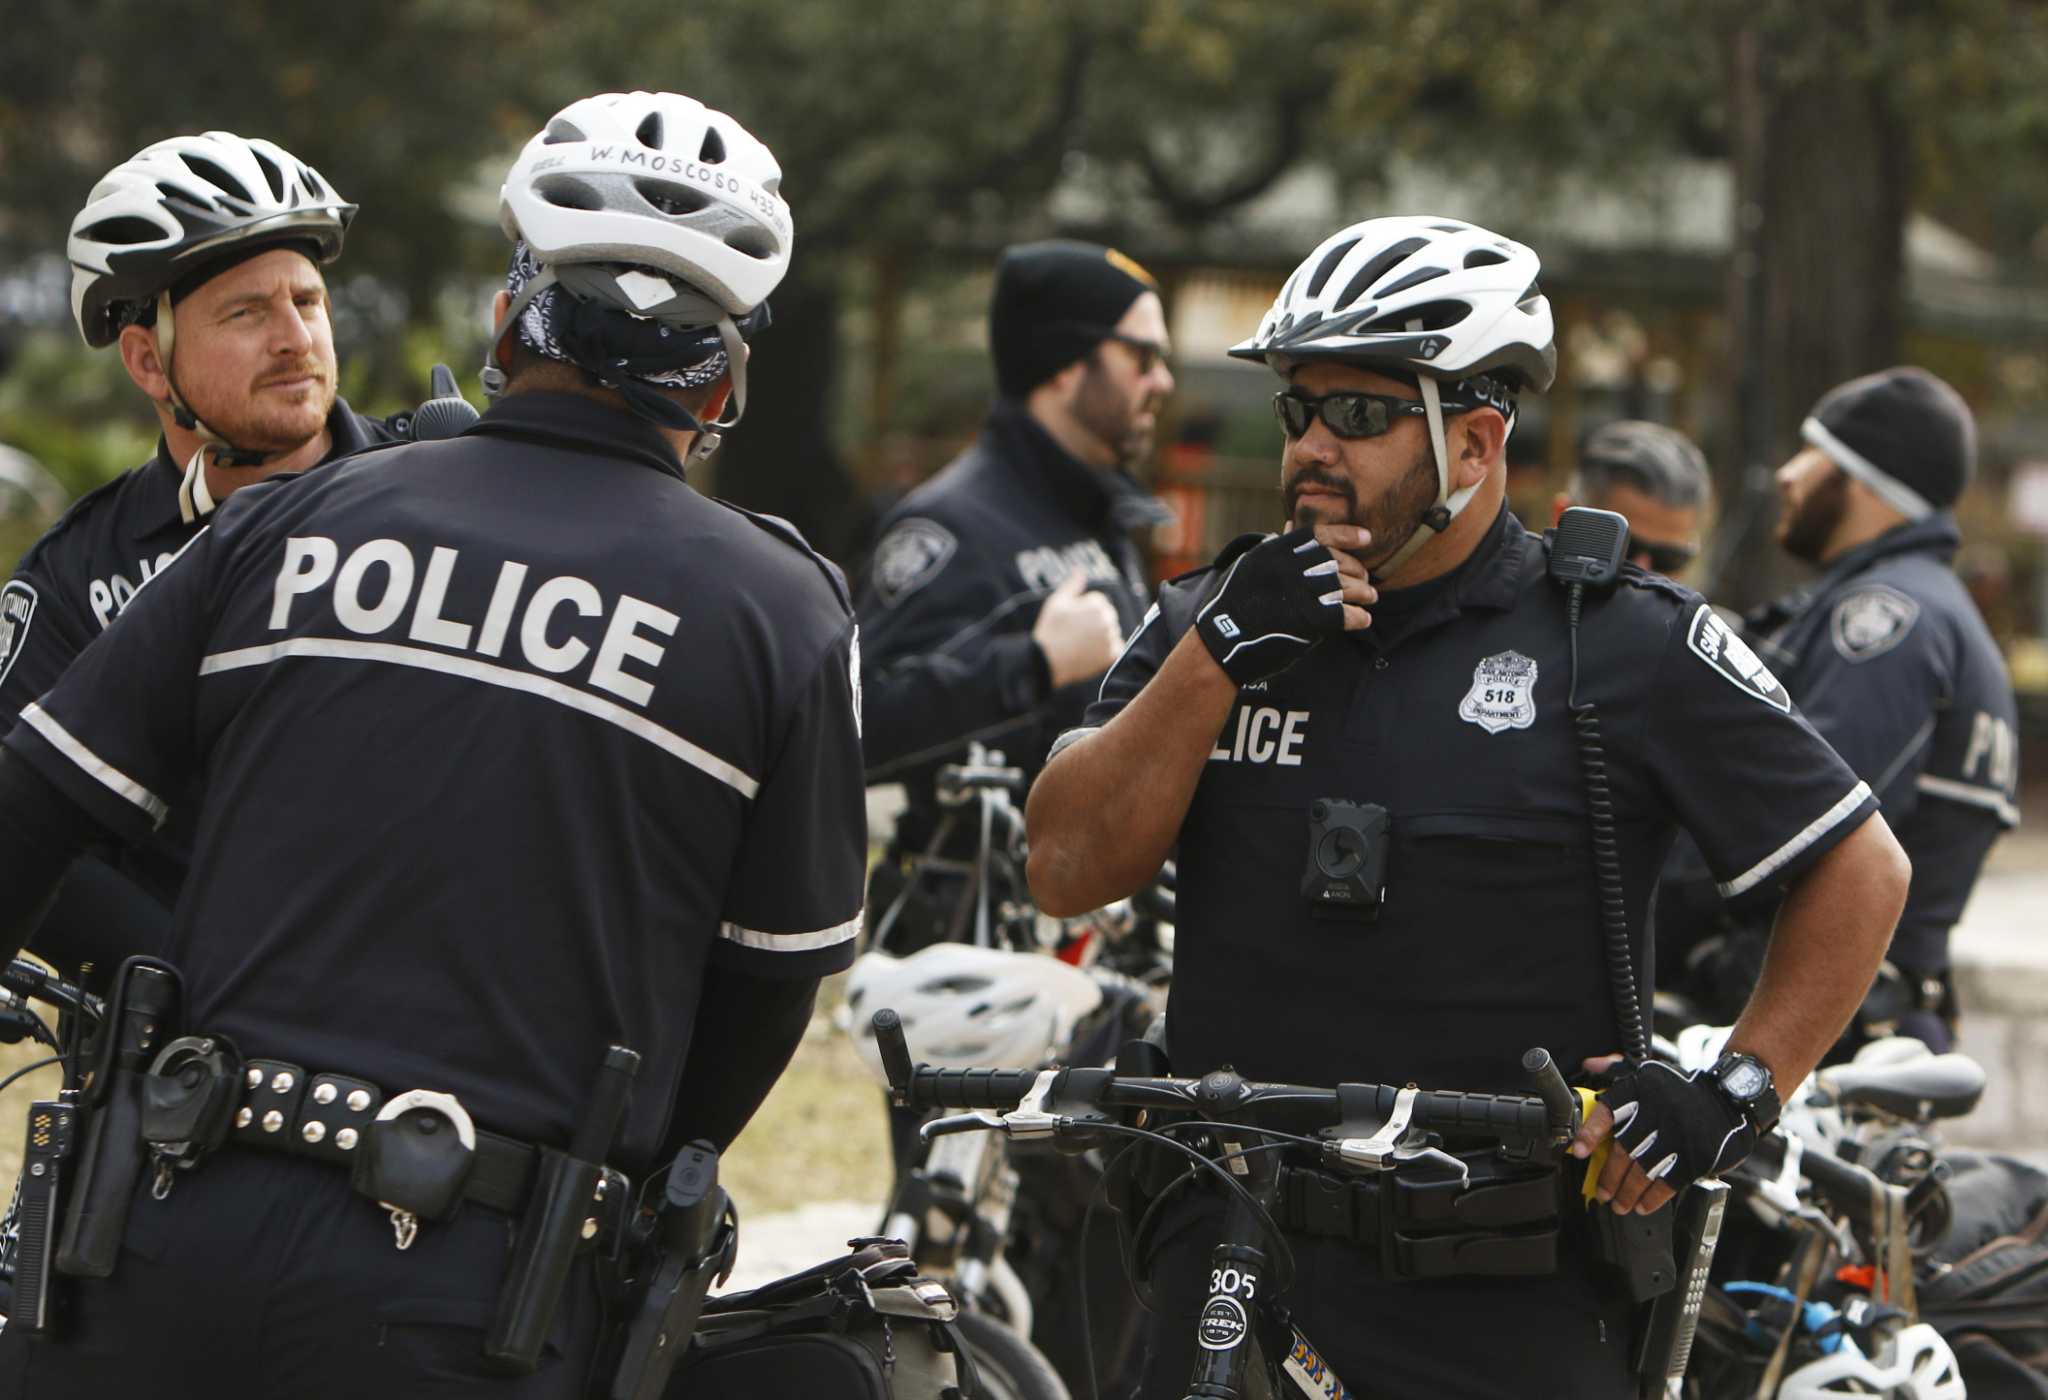 It’s been two years since SAPD started using body cameras. Are they